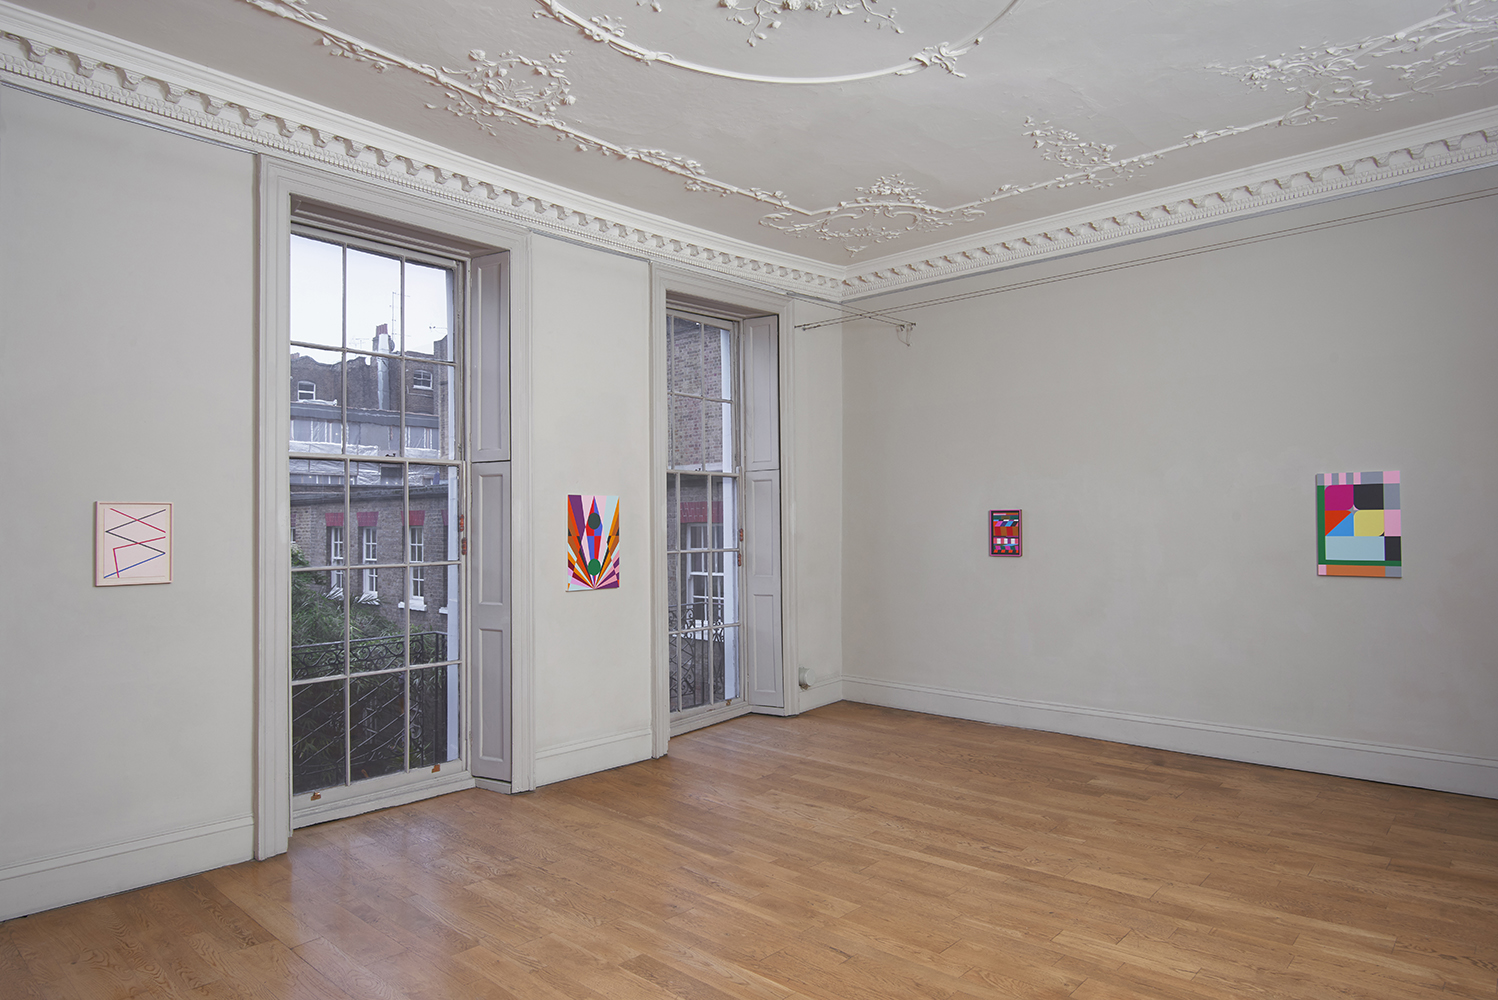 image: Lothar Götz 'Salvation' installation view, photo by Andy Keate